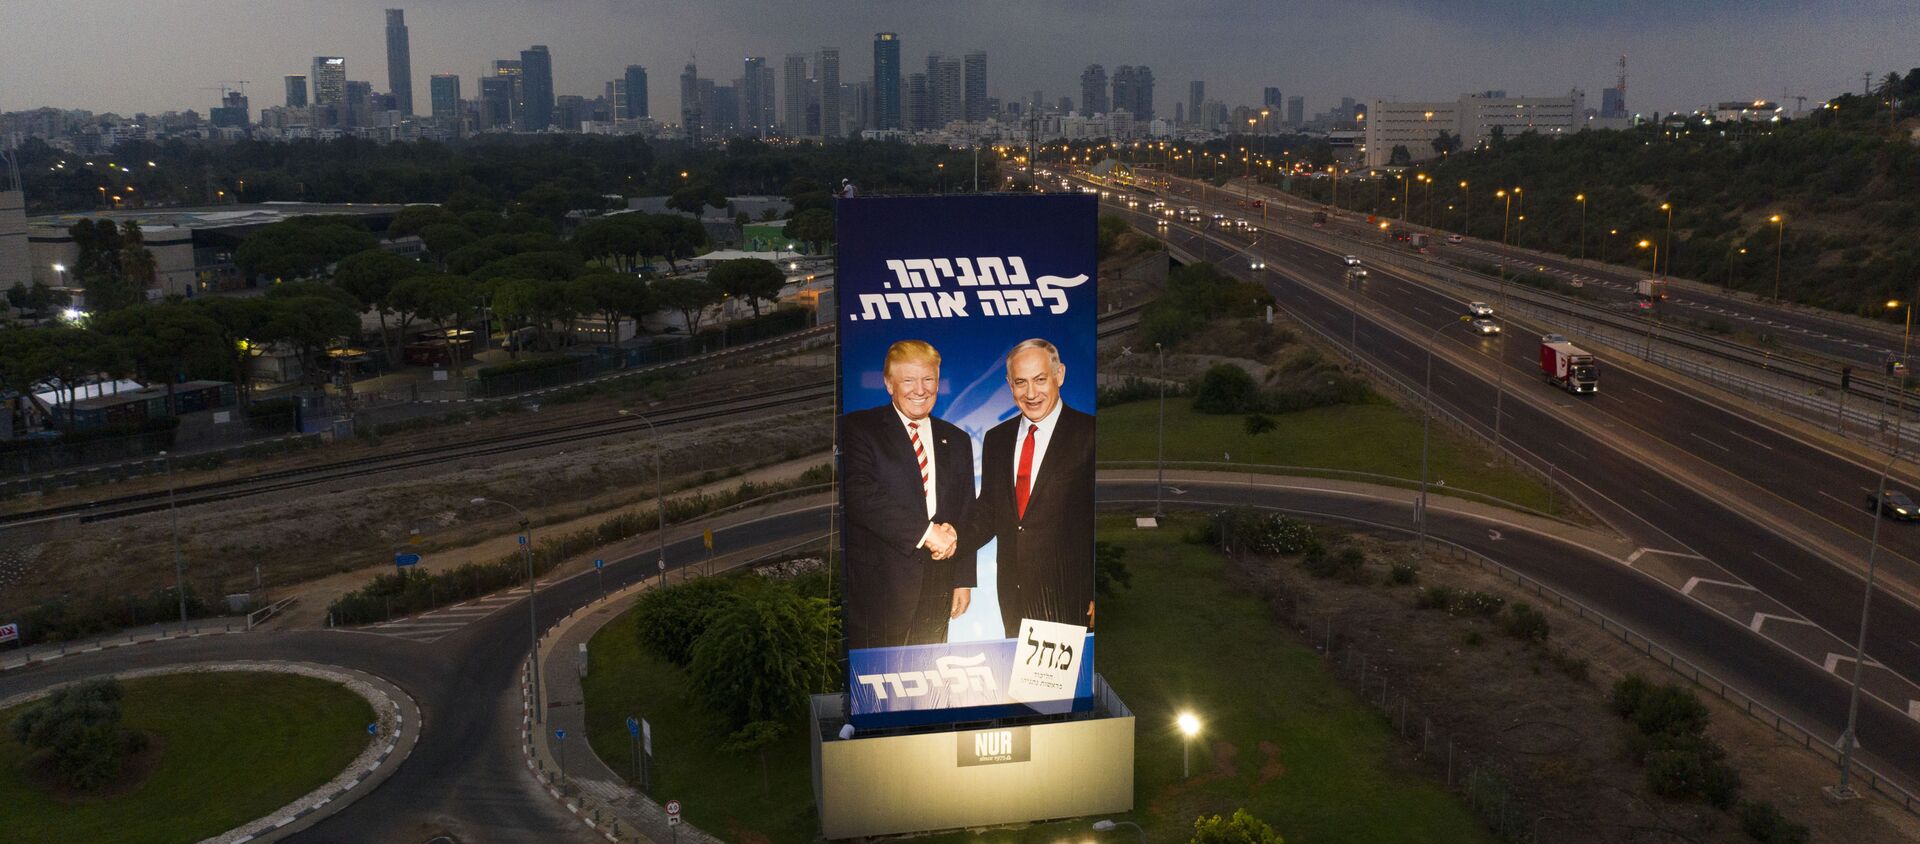 A massive Likud party election campaign billboard shows Israeli Prime Minister Benjamin Netanyahu, right, and US President Donald Trump in Tel Aviv, Israel, Sunday, 8 September 2019. The Hebrew on the billboard reads Netanyahu, in another league.  - Sputnik International, 1920, 21.01.2020